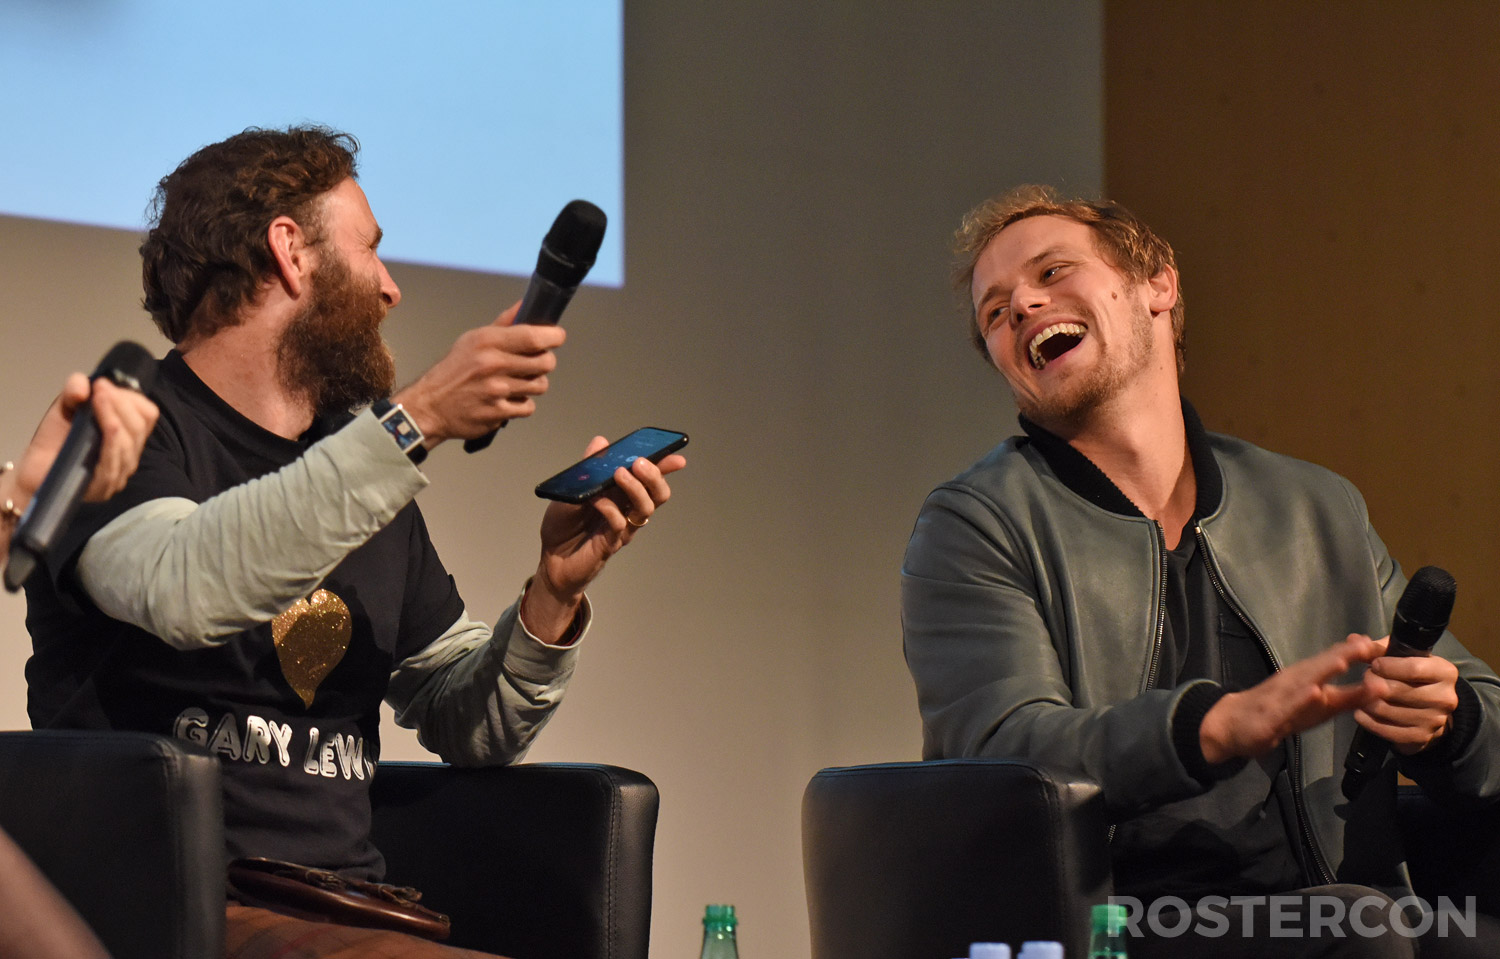 Panel Steven Cree, Sam Heughan - The Land Con - Wevents